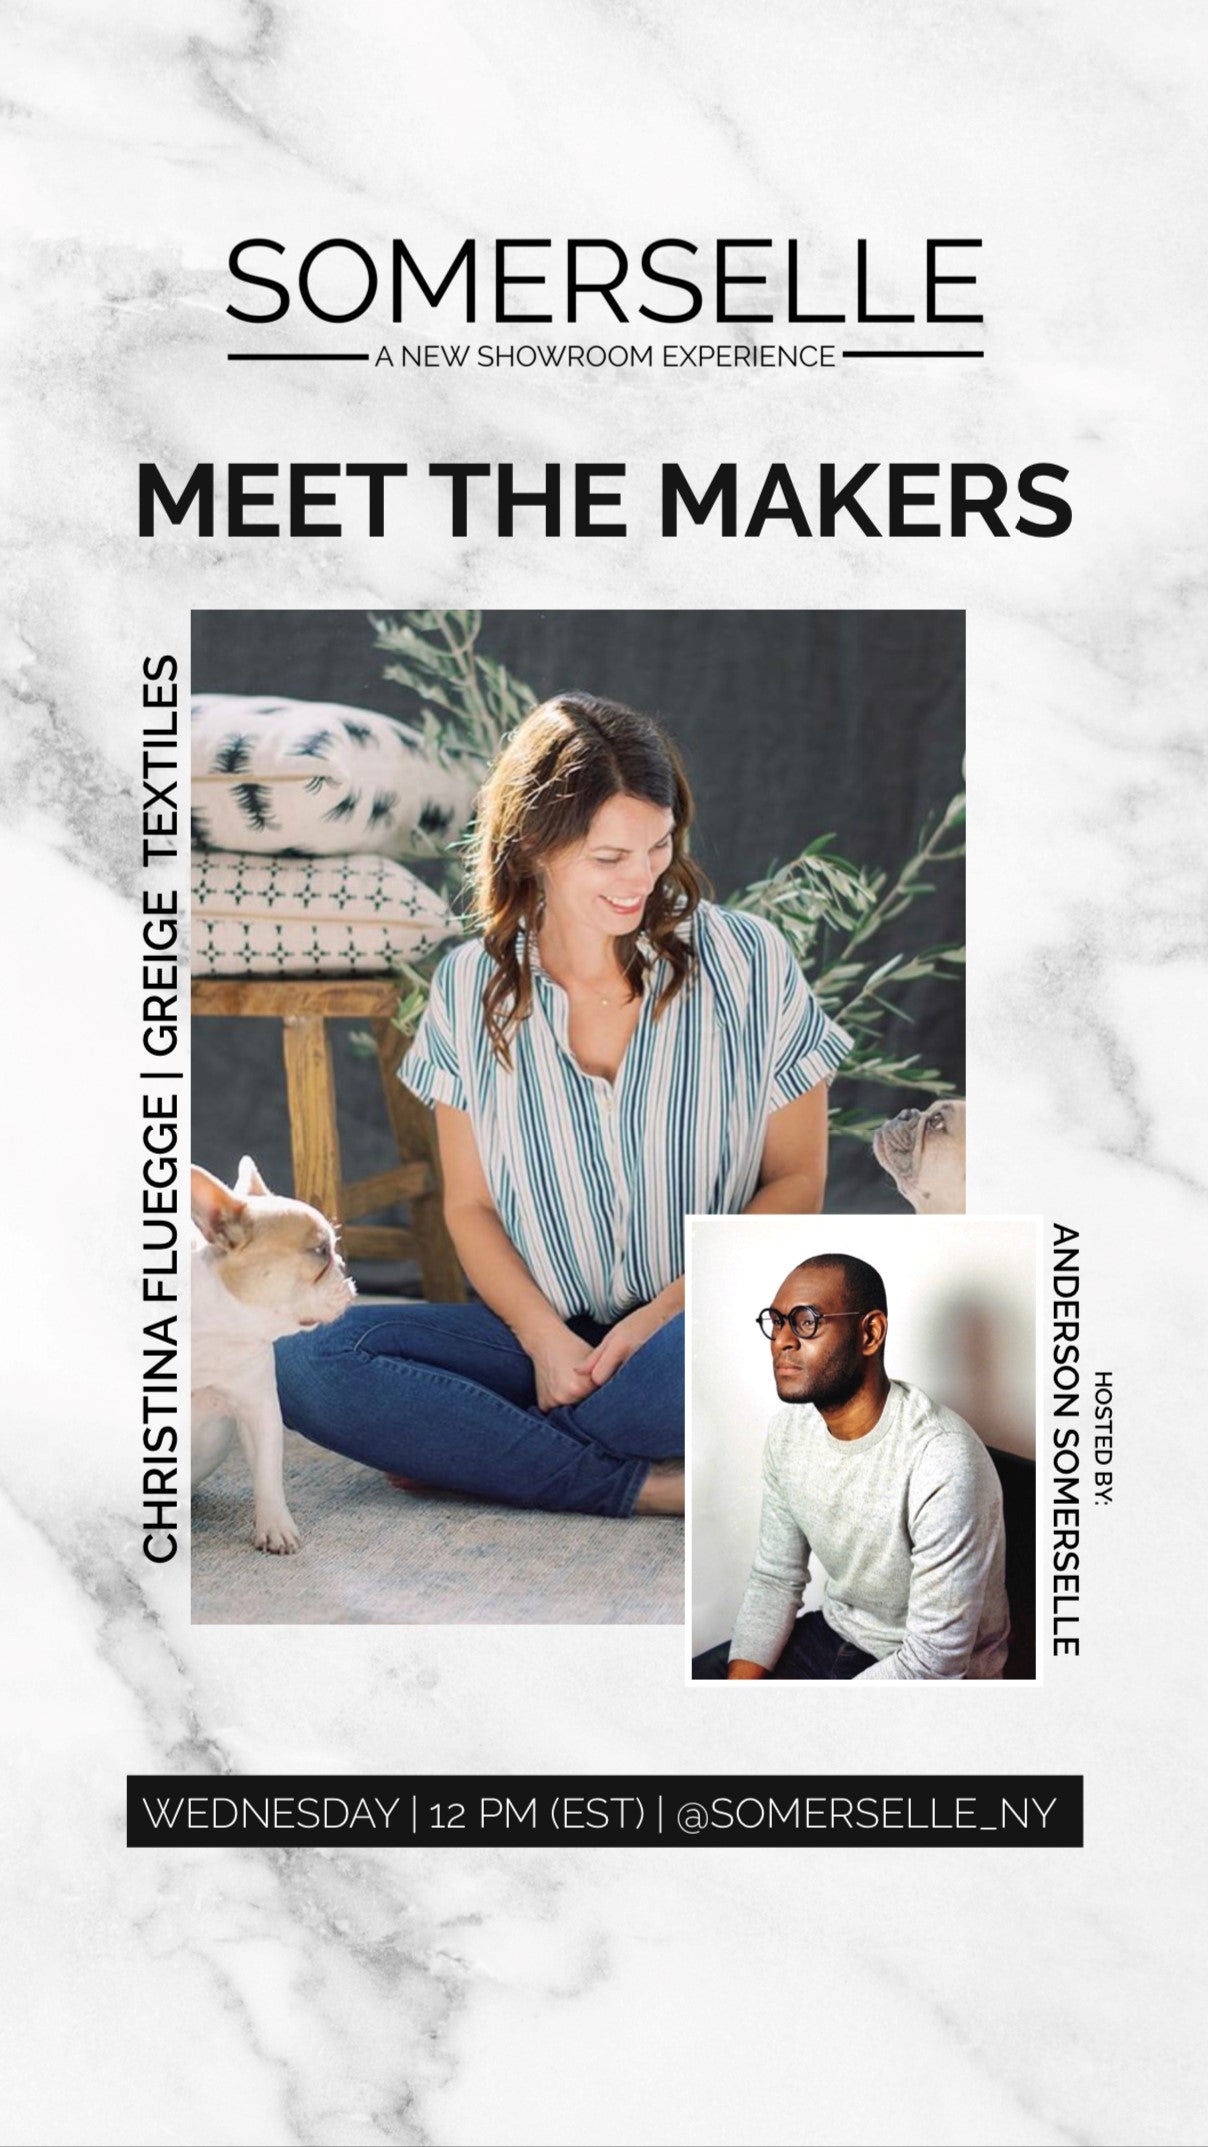 Watch Founder Christina Fluegge on Somerselle Meet the Makers Instagram Live